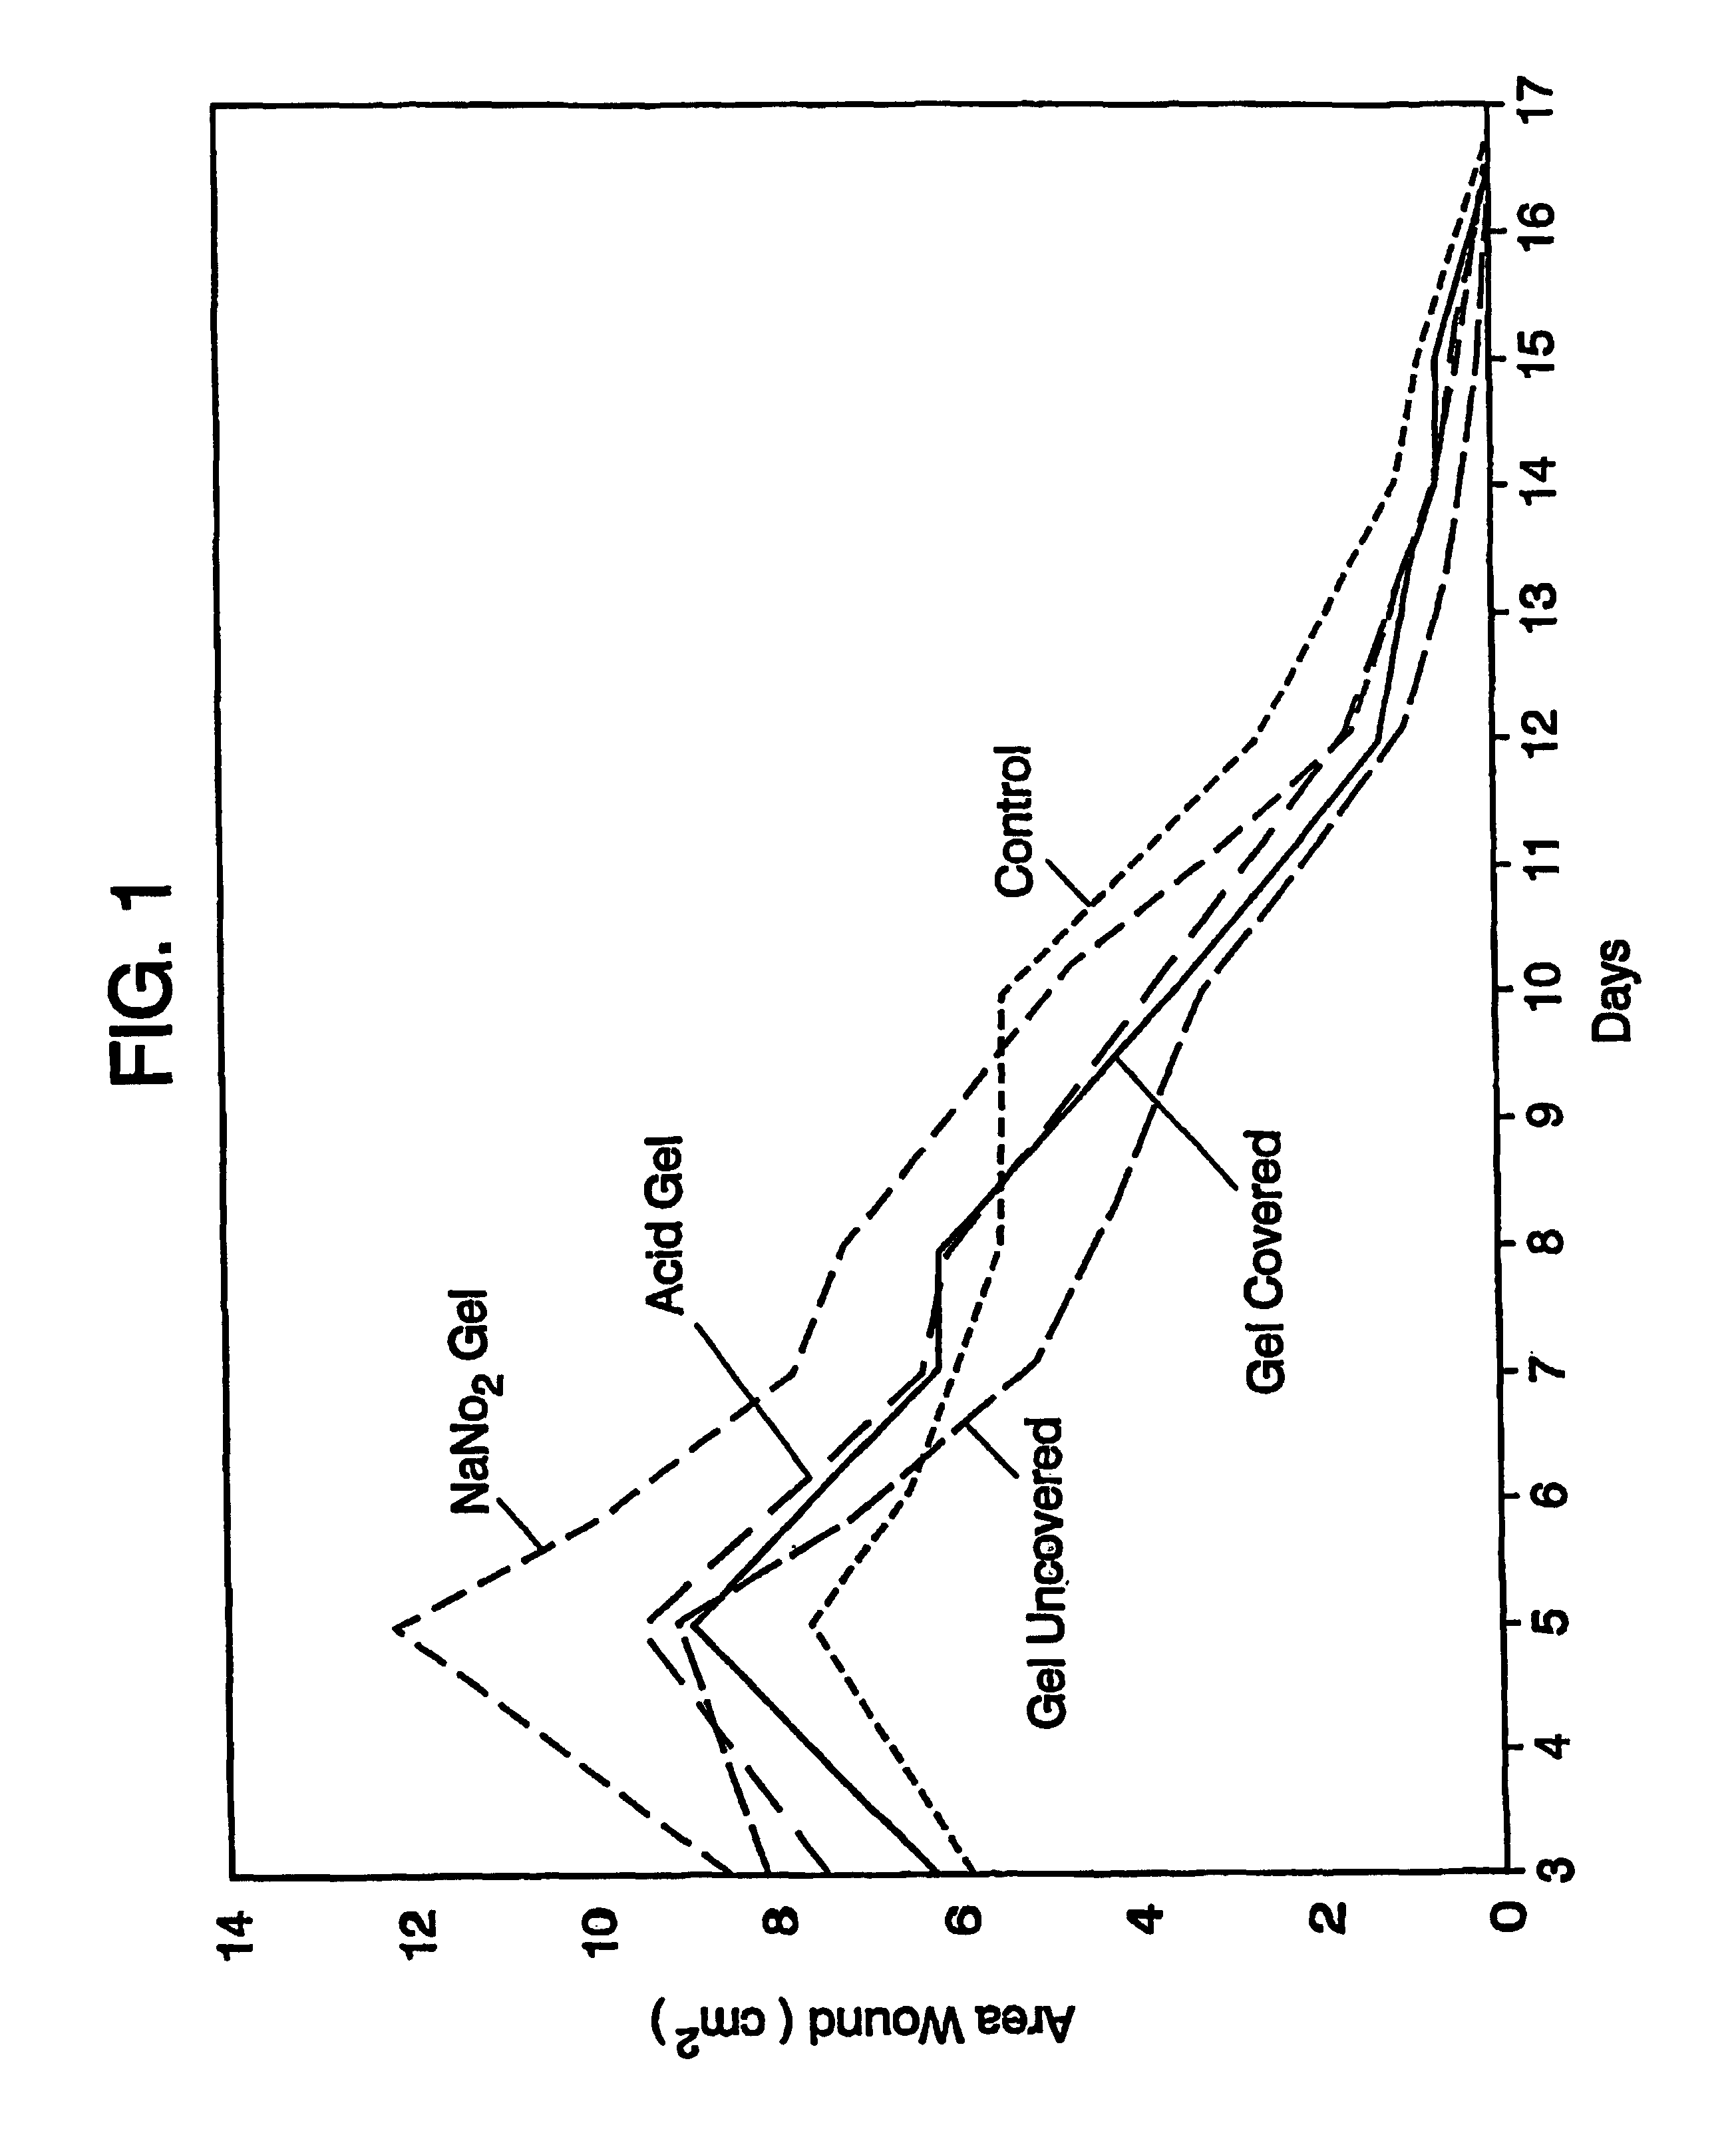 Systems and methods for topical treatment with nitric oxide